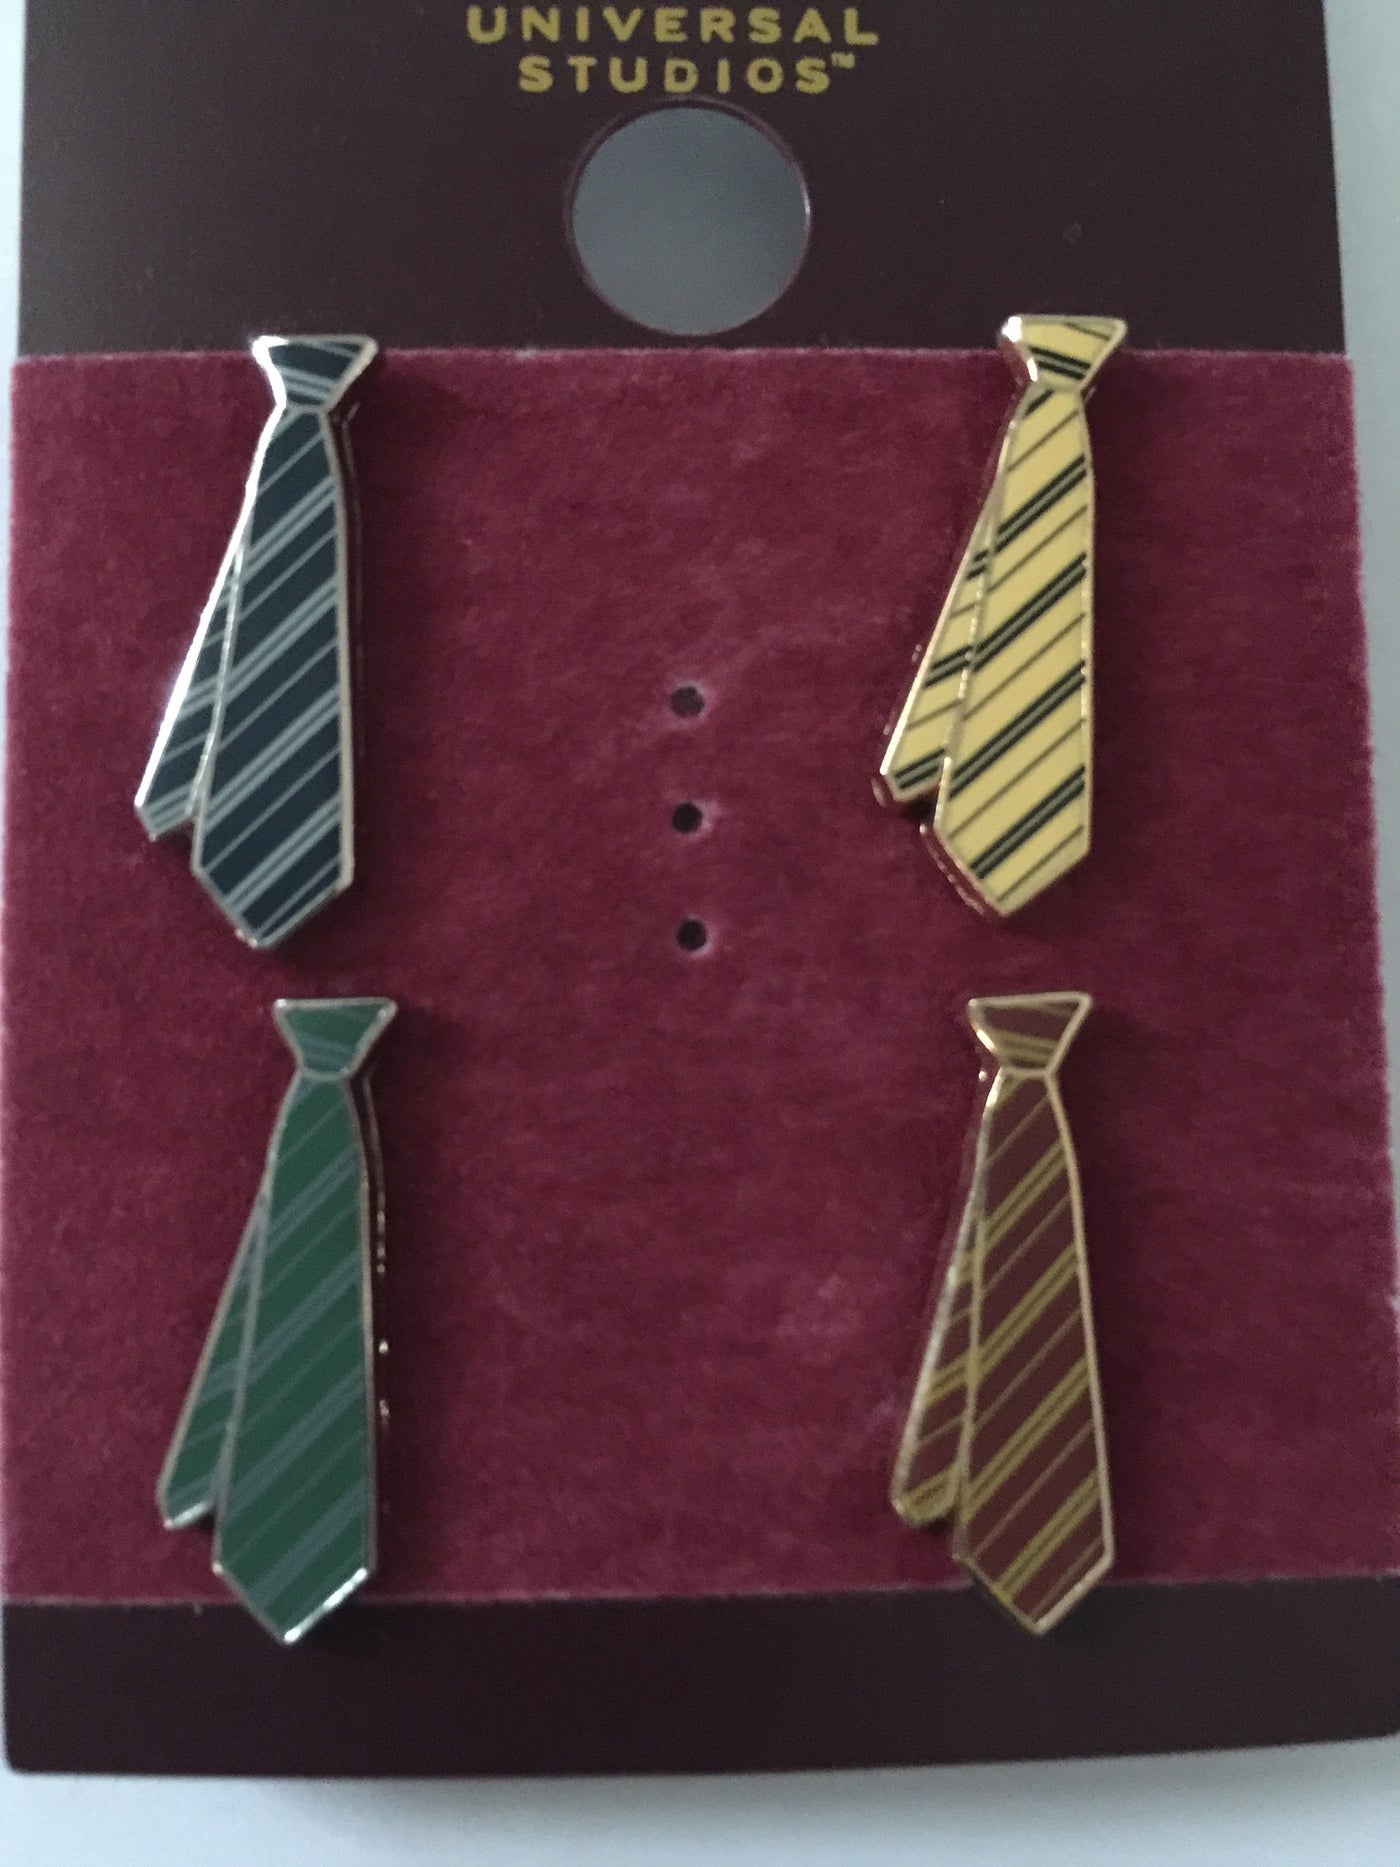 Universal Studios Wizarding World of Harry Potter Mini Tie Pin Set New with Card